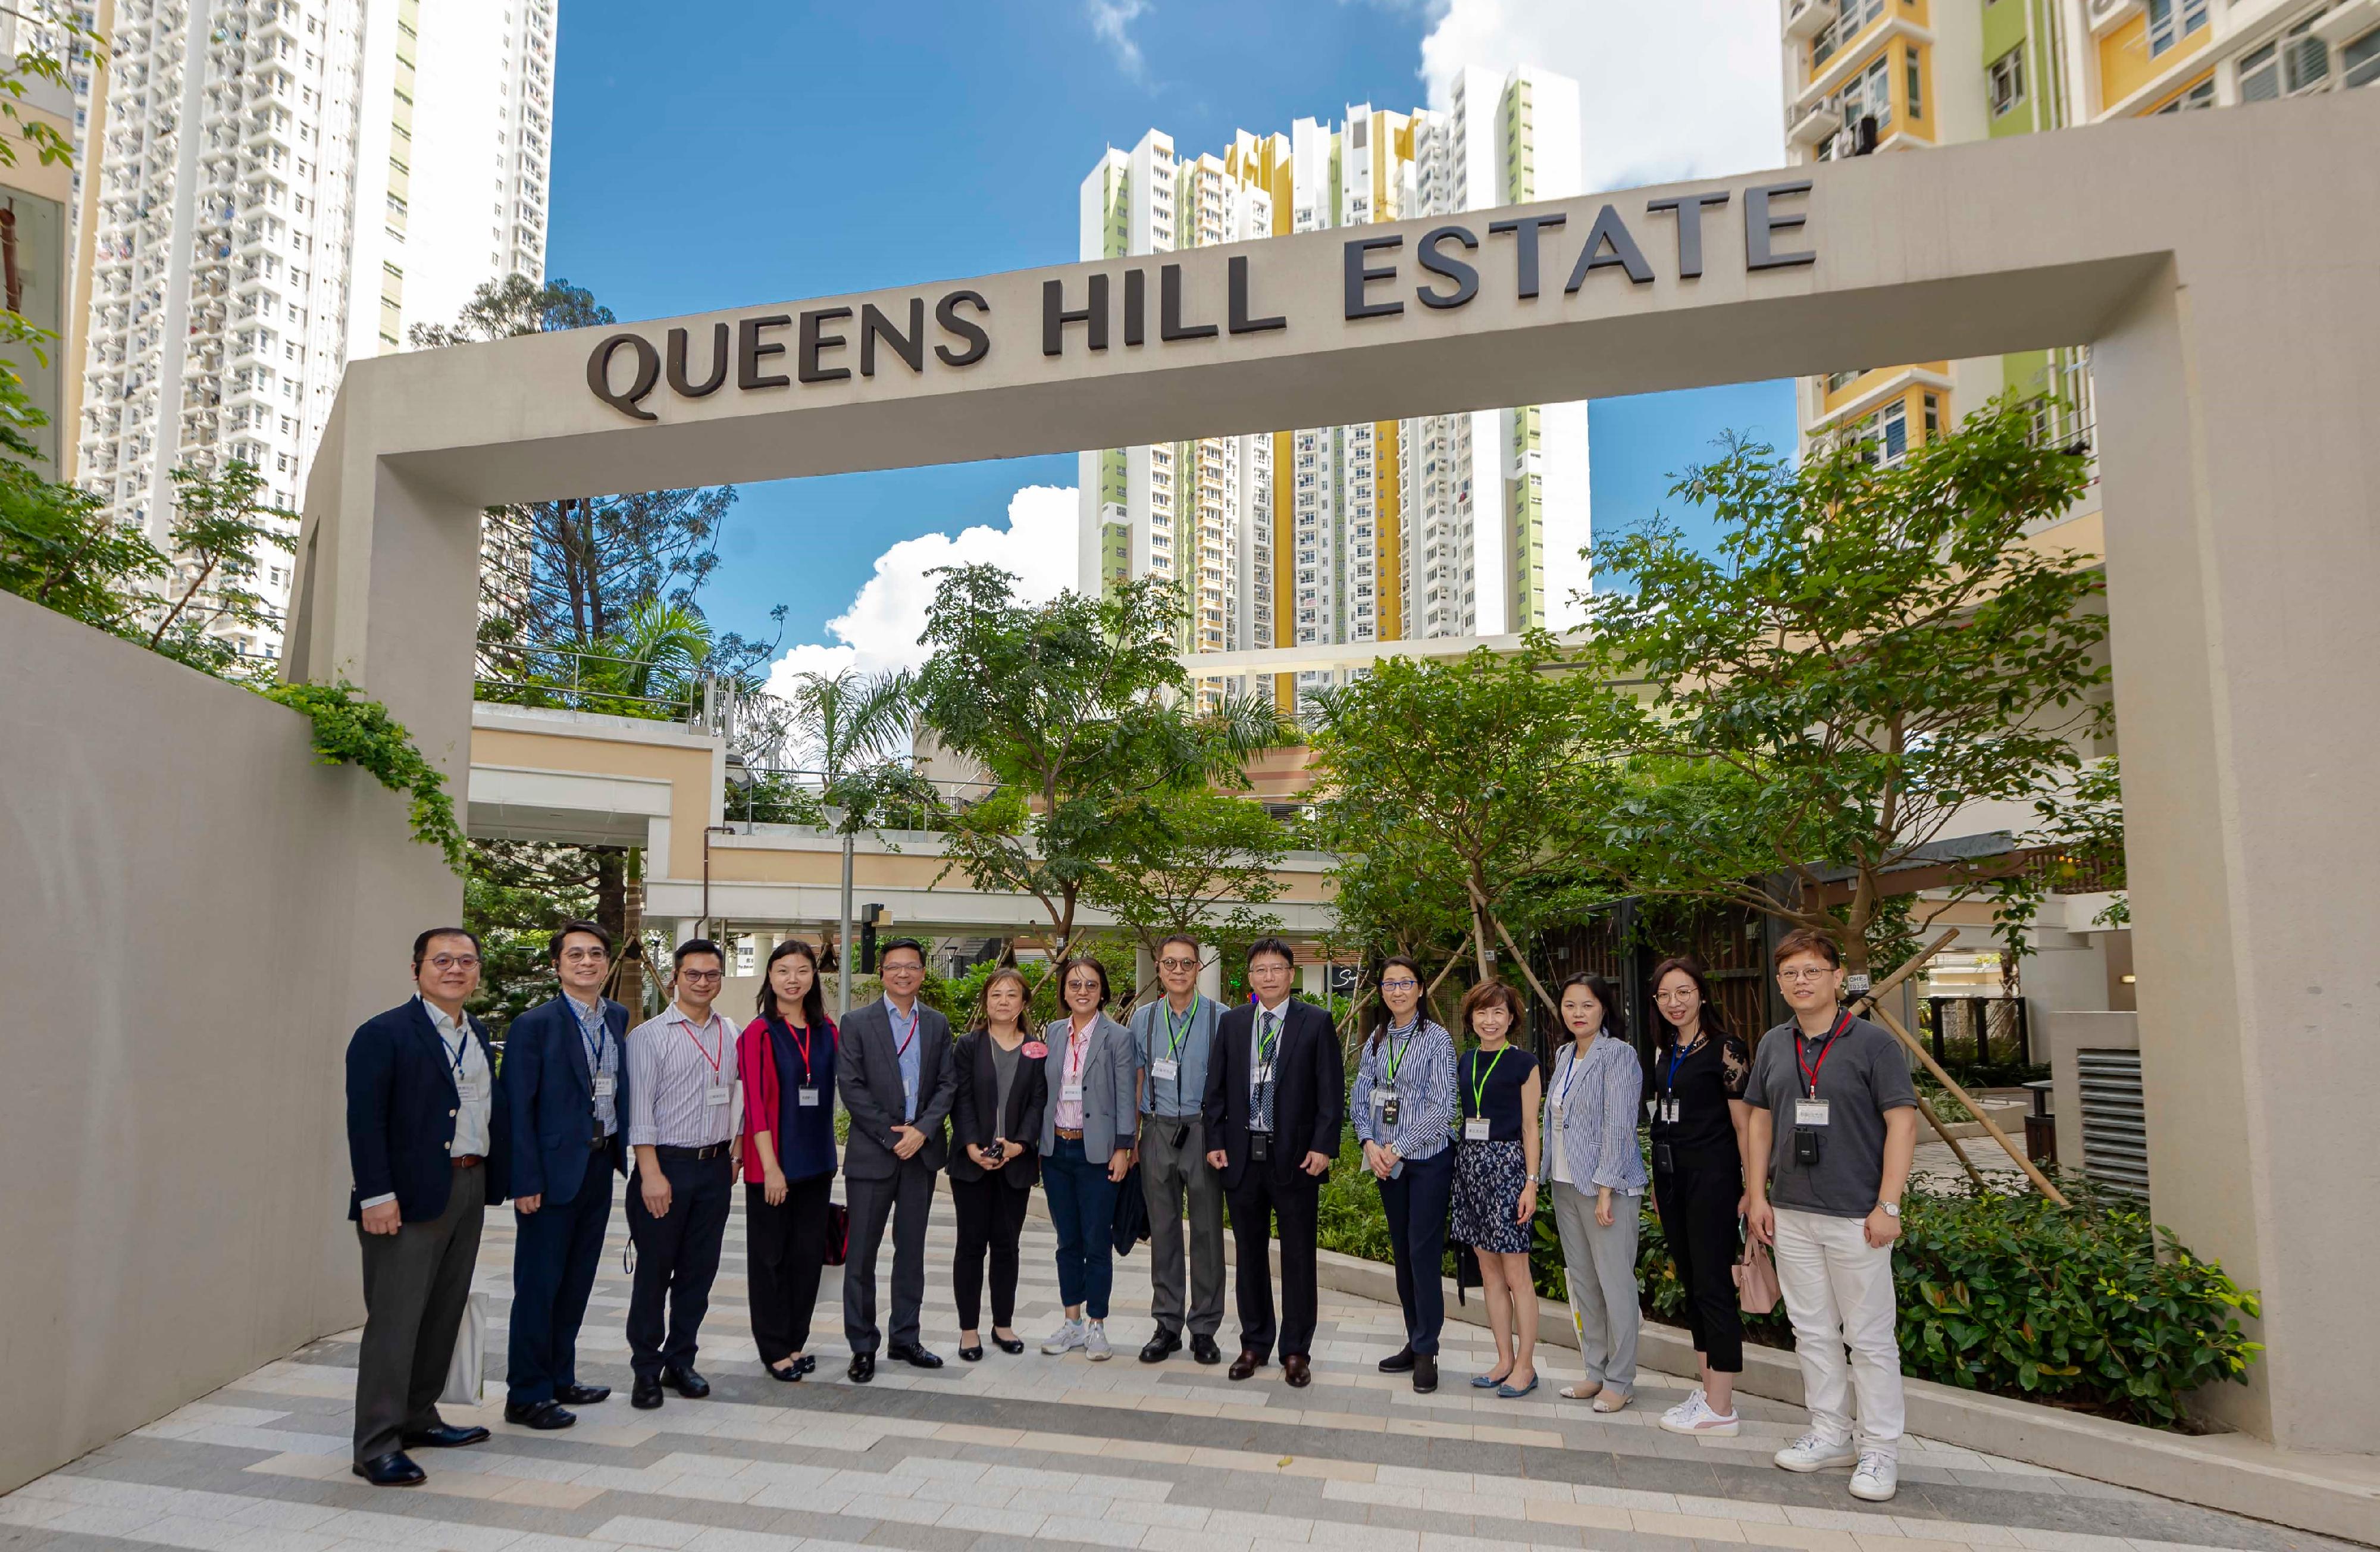 Members of the Hong Kong Housing Authority (HA) and its Commercial Properties Committee (CPC) today (June 20) visited the commercial facilities at the HA's Queens Hill Estate in Fanling. Photo shows the Chairman of the HA's CPC, Ms Serena Lau (seventh left), members of the HA/CPC and officials of the Housing Department at Queens Hill Estate.